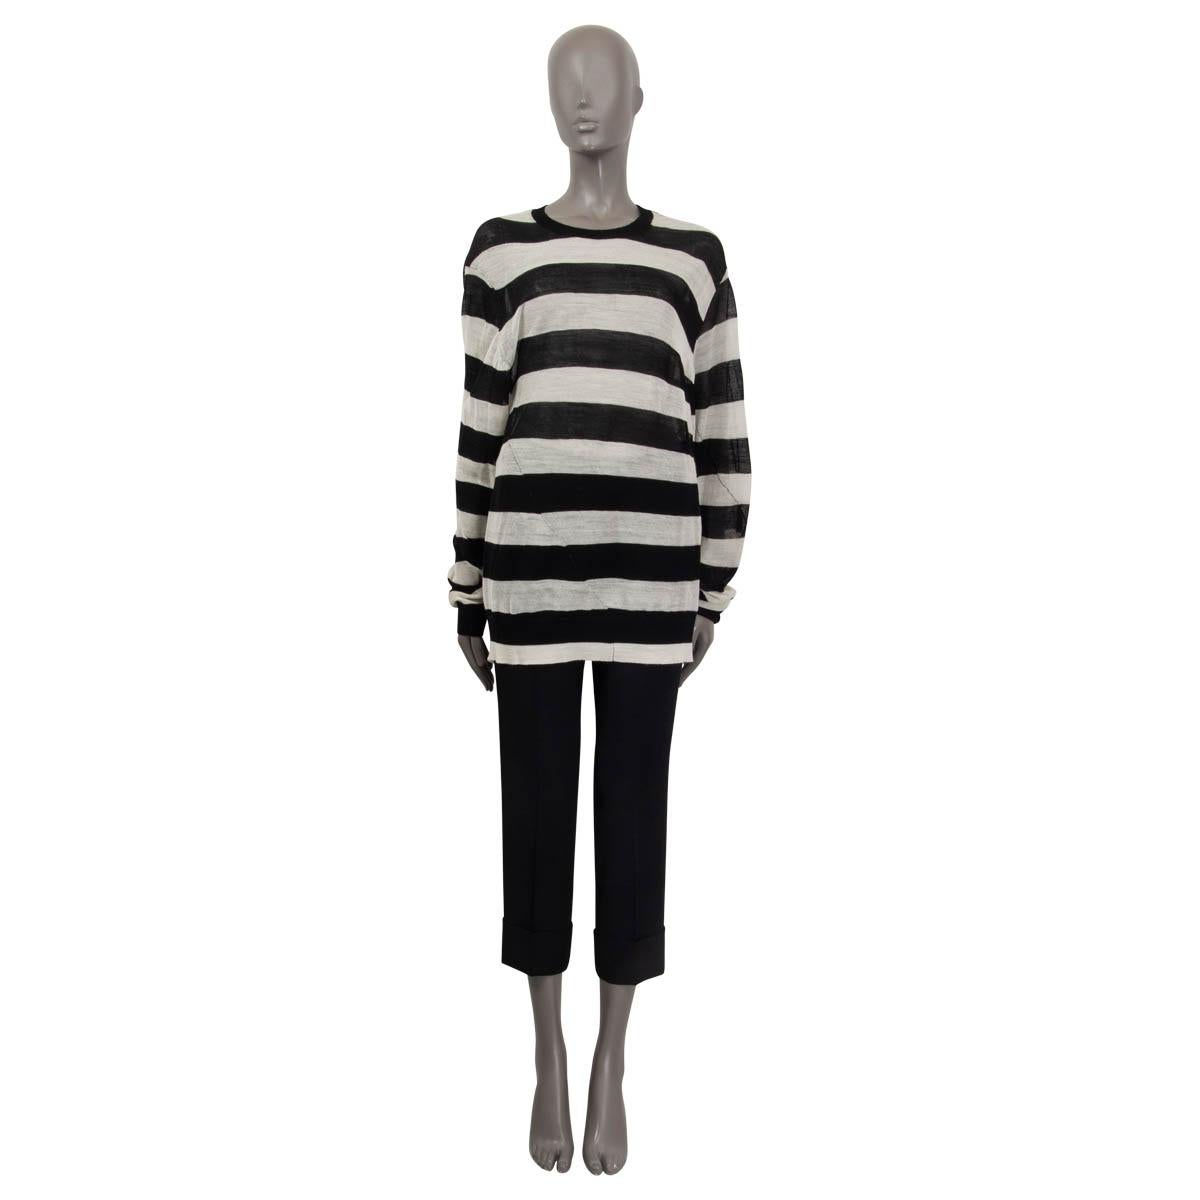 100% authentic Ann Demeulemeester striped wool sweater in black and white wool (100%). Features a semi-sheer appearance and is constructed with twisted seams. Has a crew neck, long sleeves and a loose fit. Has been worn and is in excellent